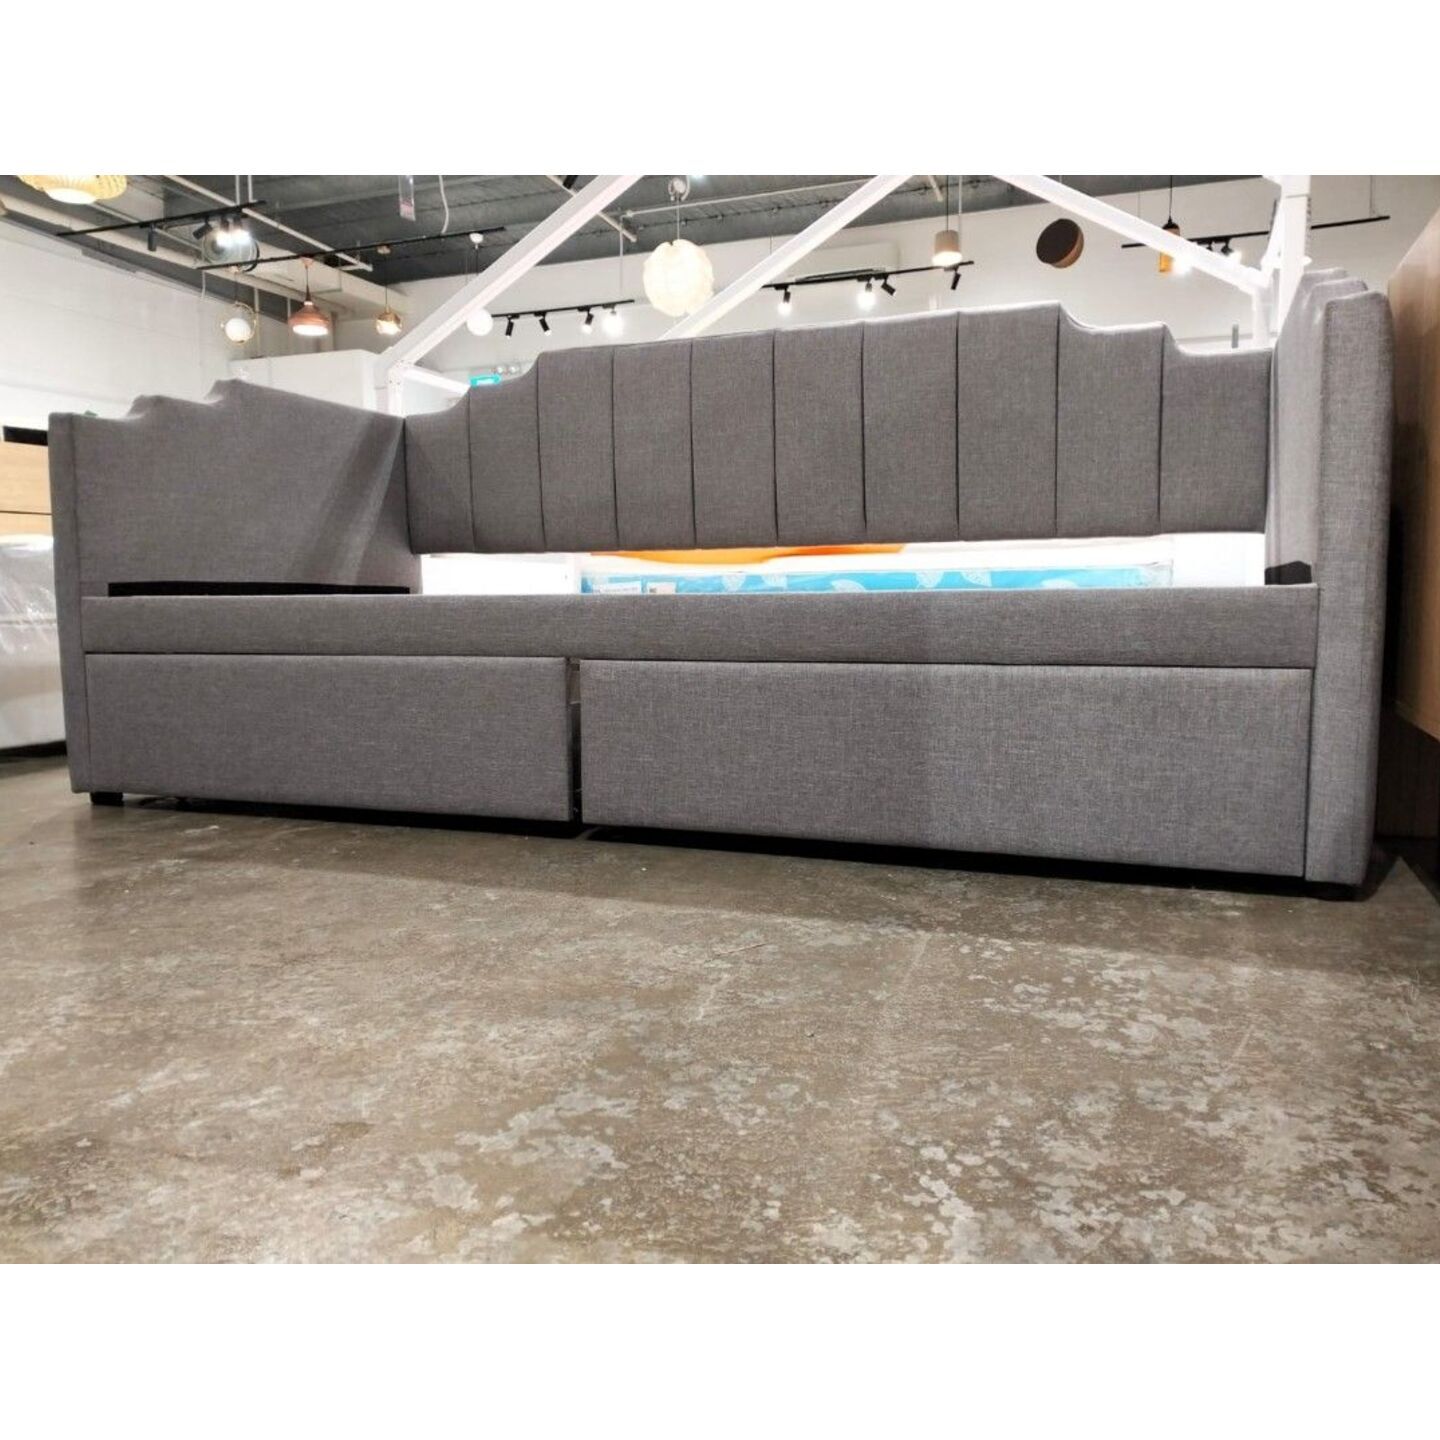 HORSEA Single Storage Day Bed with Drawers in GREY FABRIC